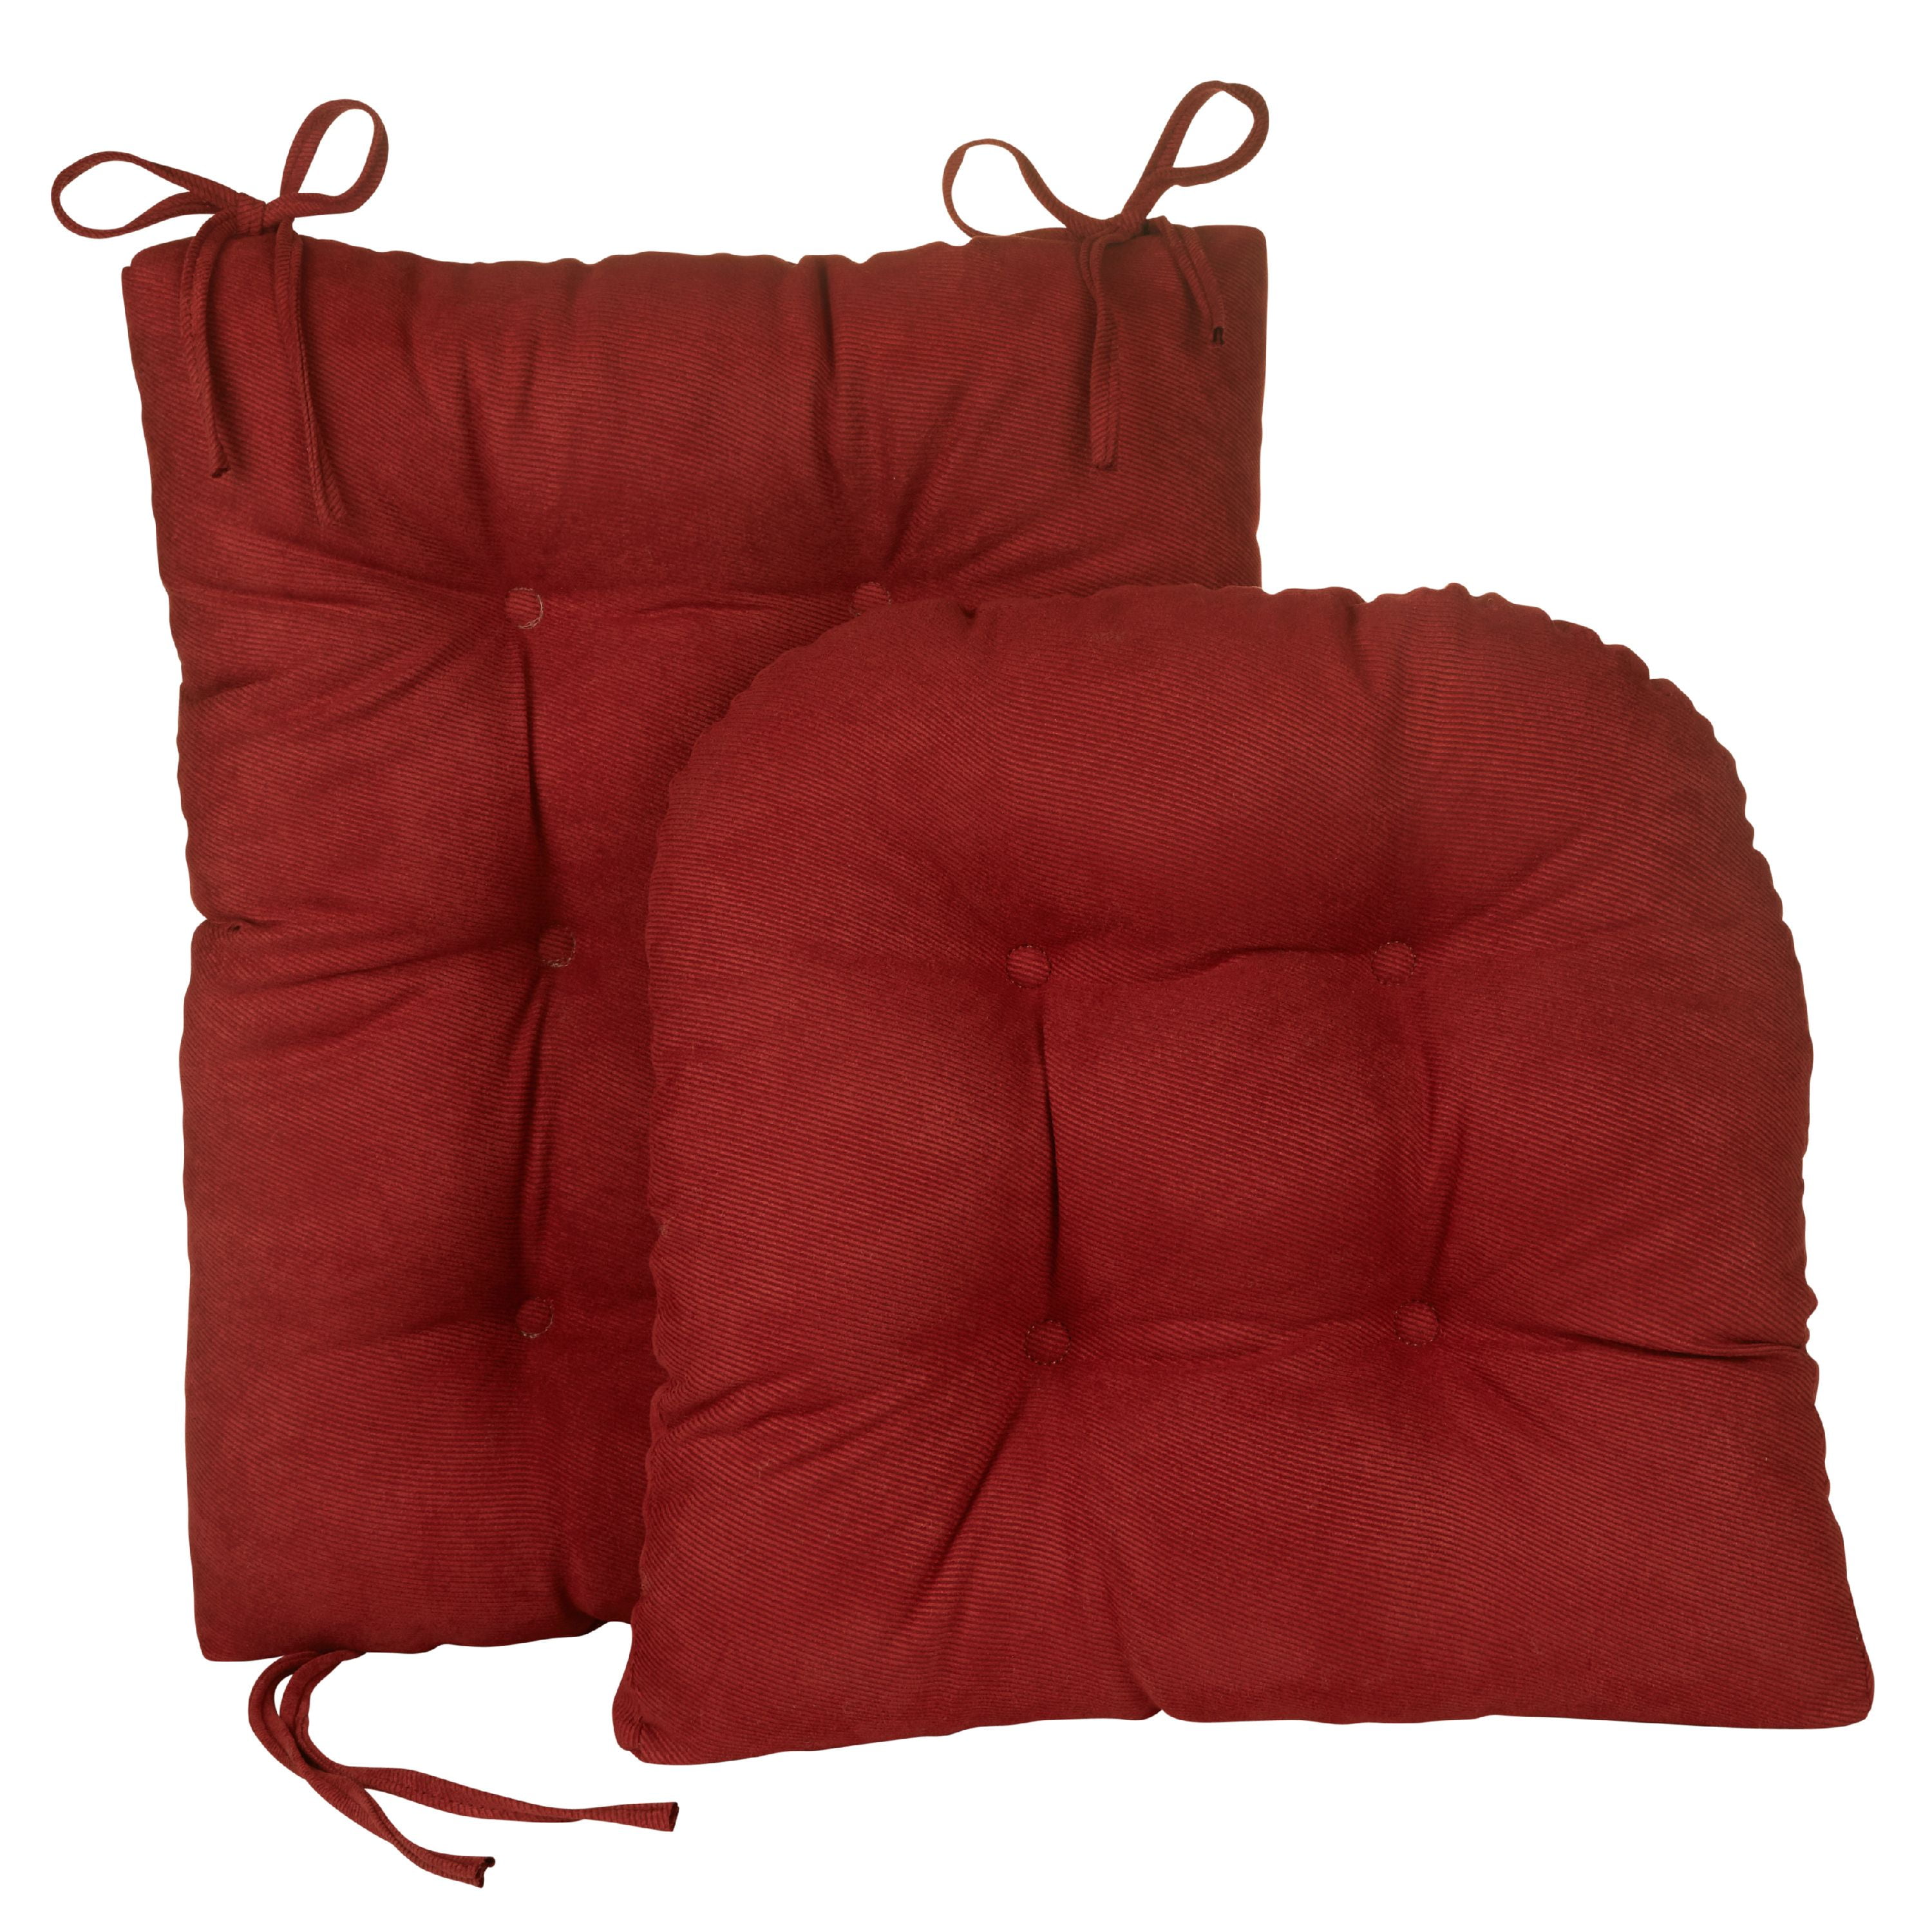 Jade  Assorted Colors Details about   The Gripper Non-Slip Polar Jumbo Rocking Chair Cushions 